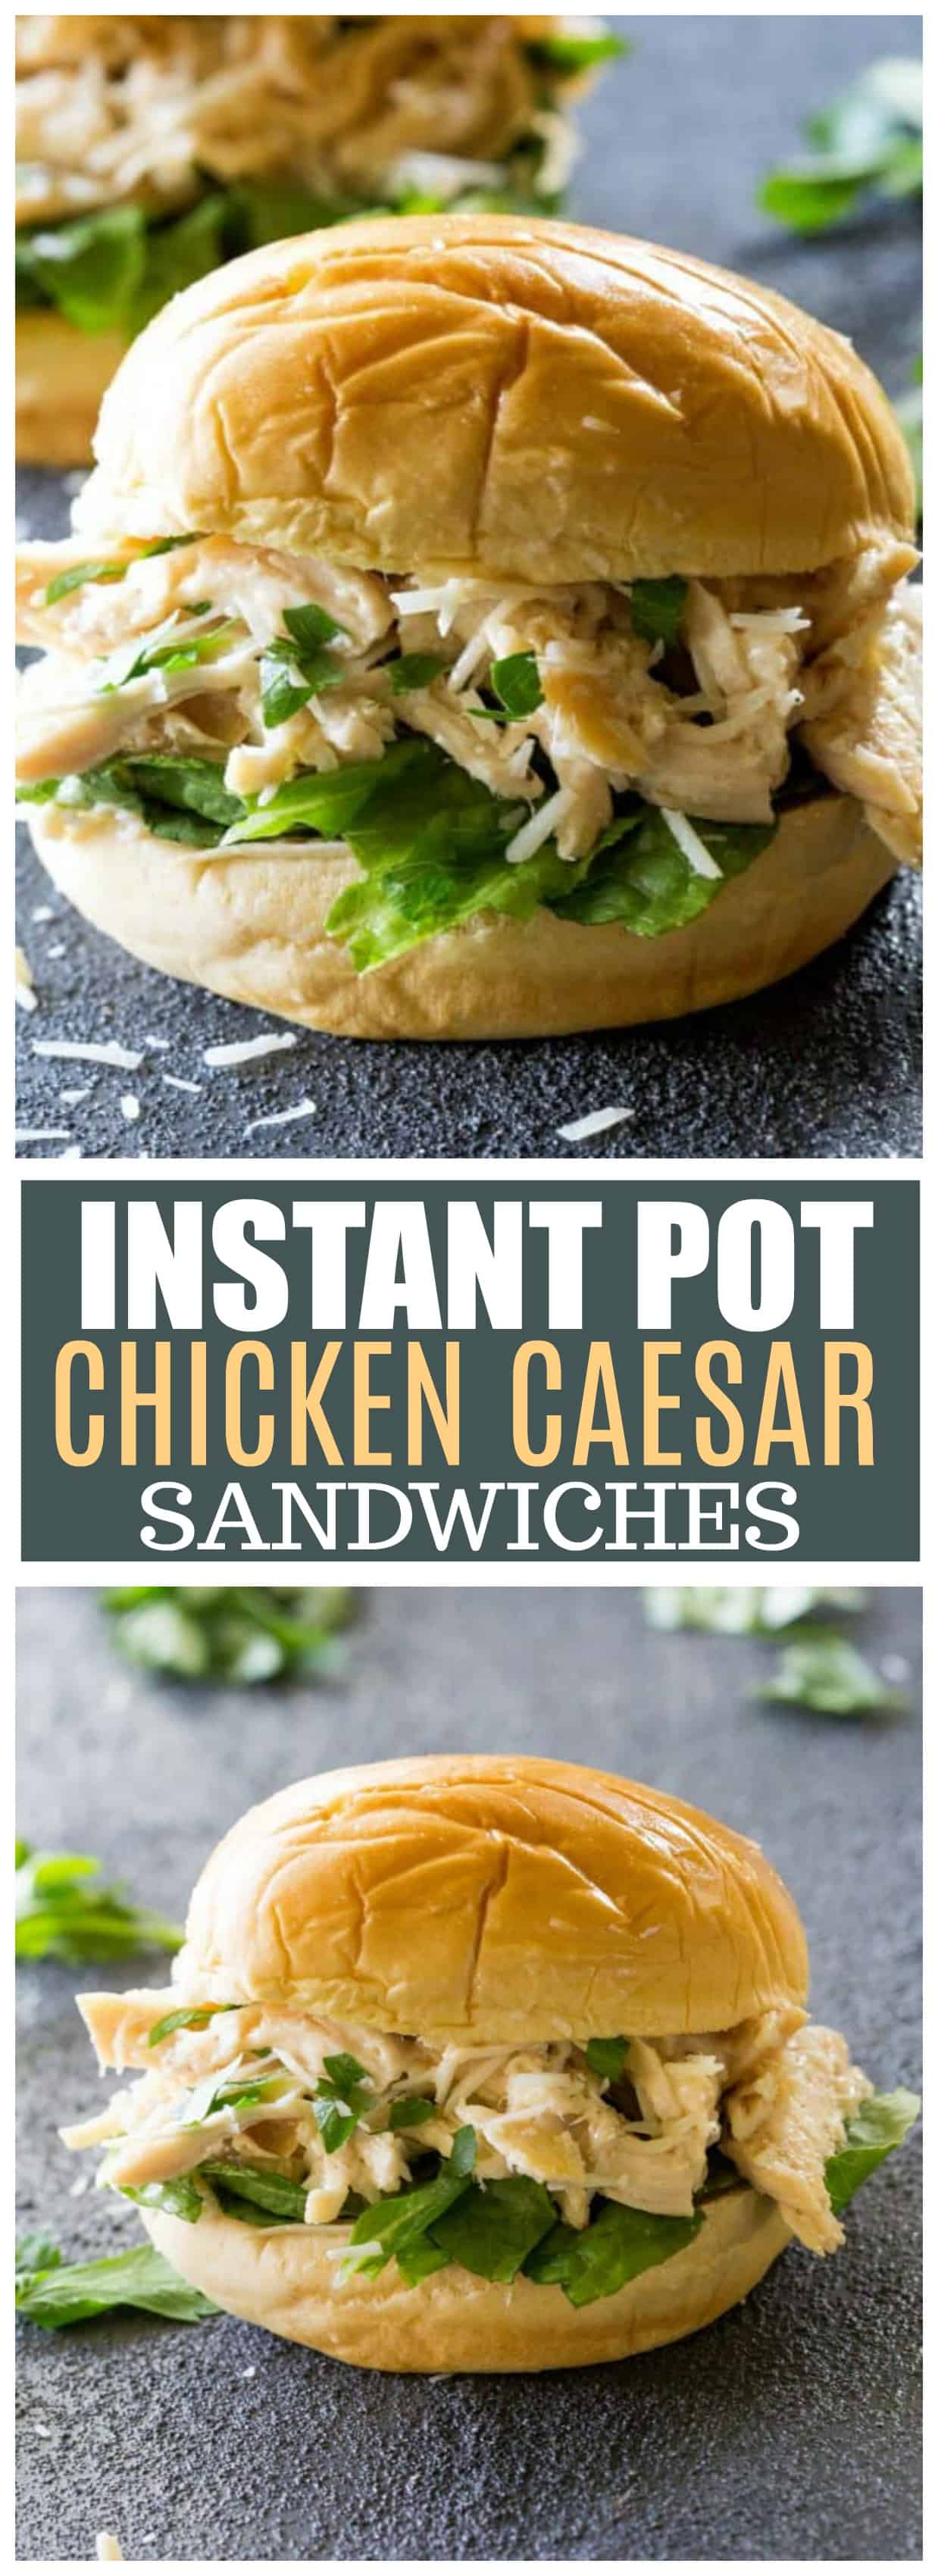 These Instant Pot Chicken Caesar Sandwiches can be made in the Instant Pot or the Slow Cooker. These are a tried and true favorite dinner.